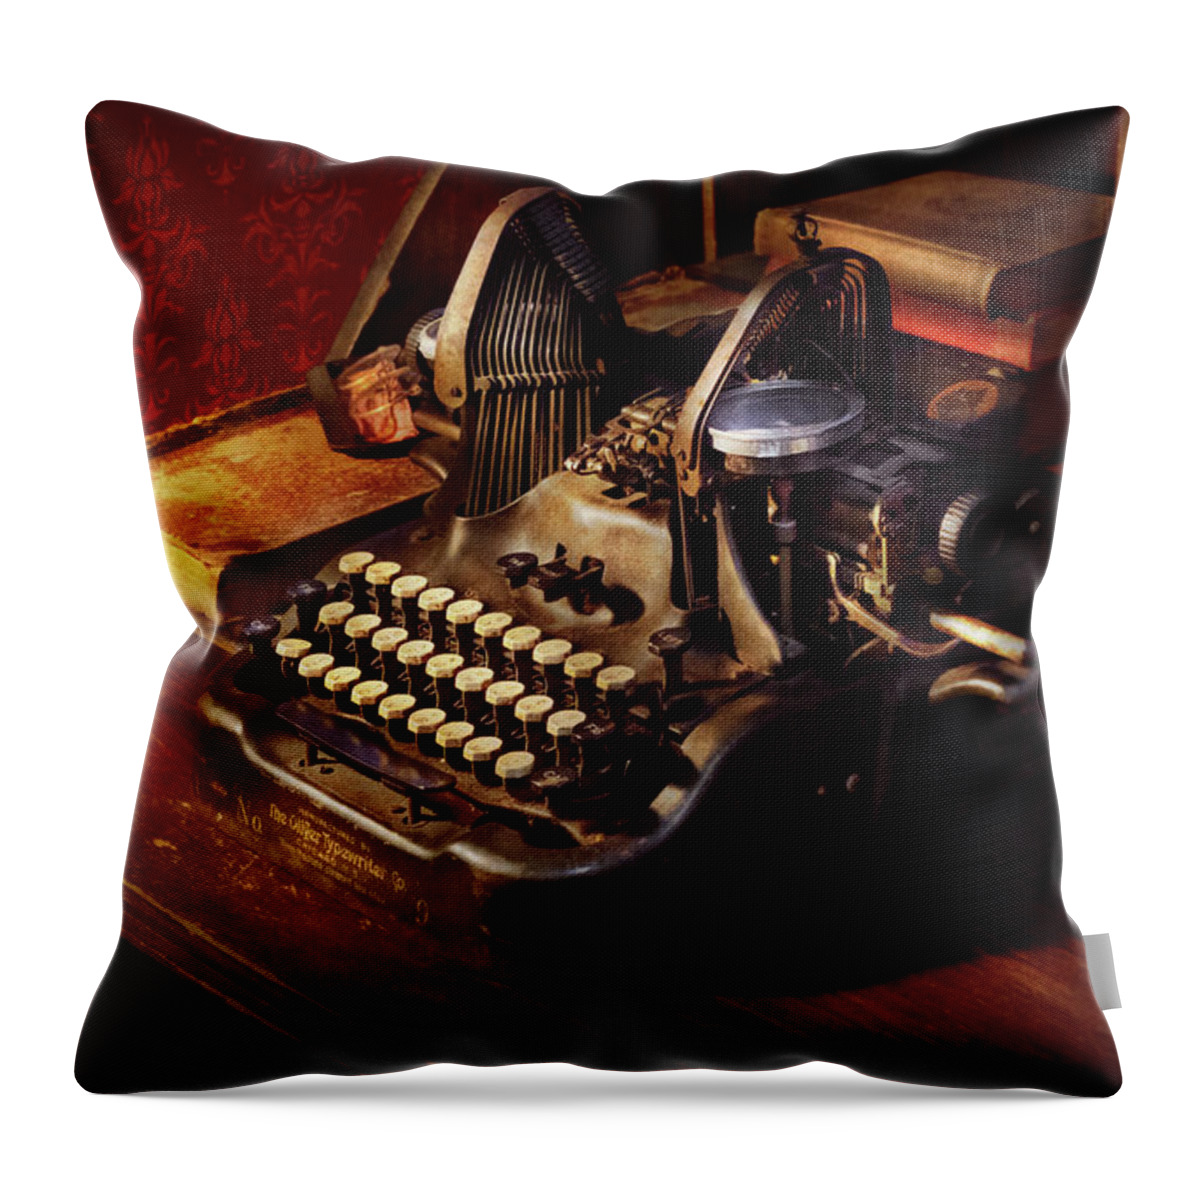 Steampunk Throw Pillow featuring the photograph Steampunk - Oliver's typing machine by Mike Savad